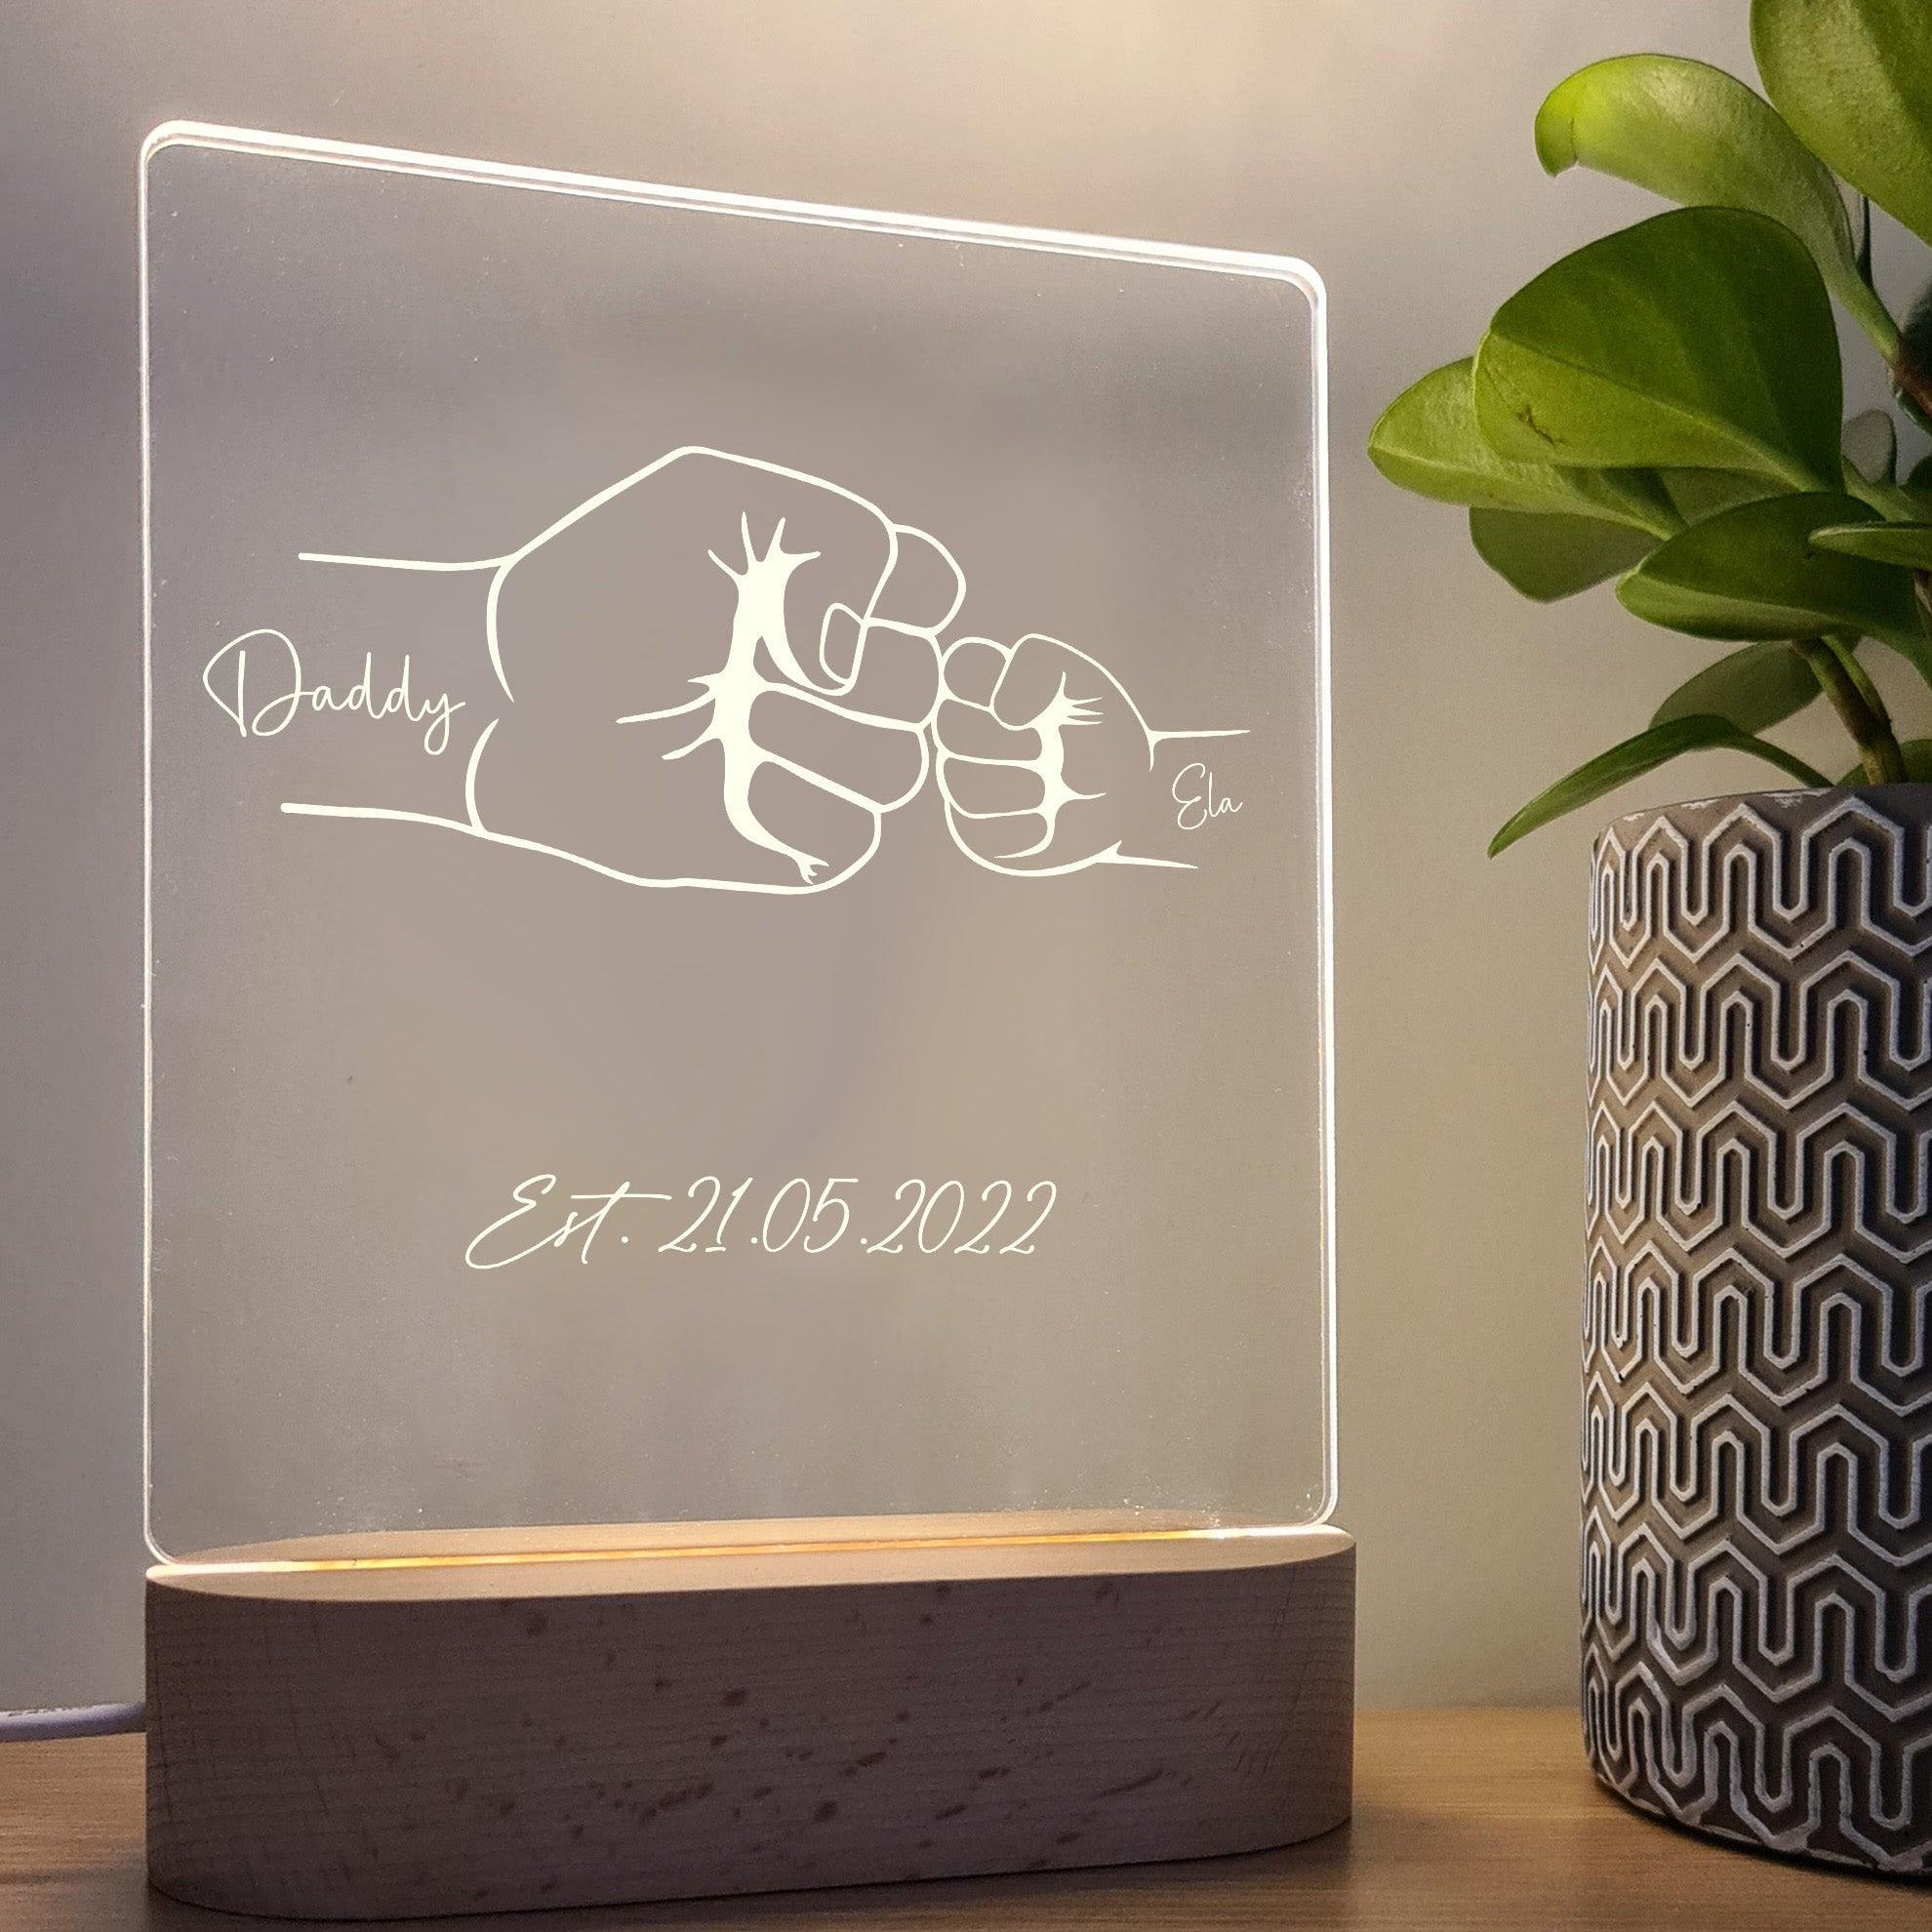 Fist Bump - Dad's Date - Personalised Father's Day Night Light - The Willow Corner